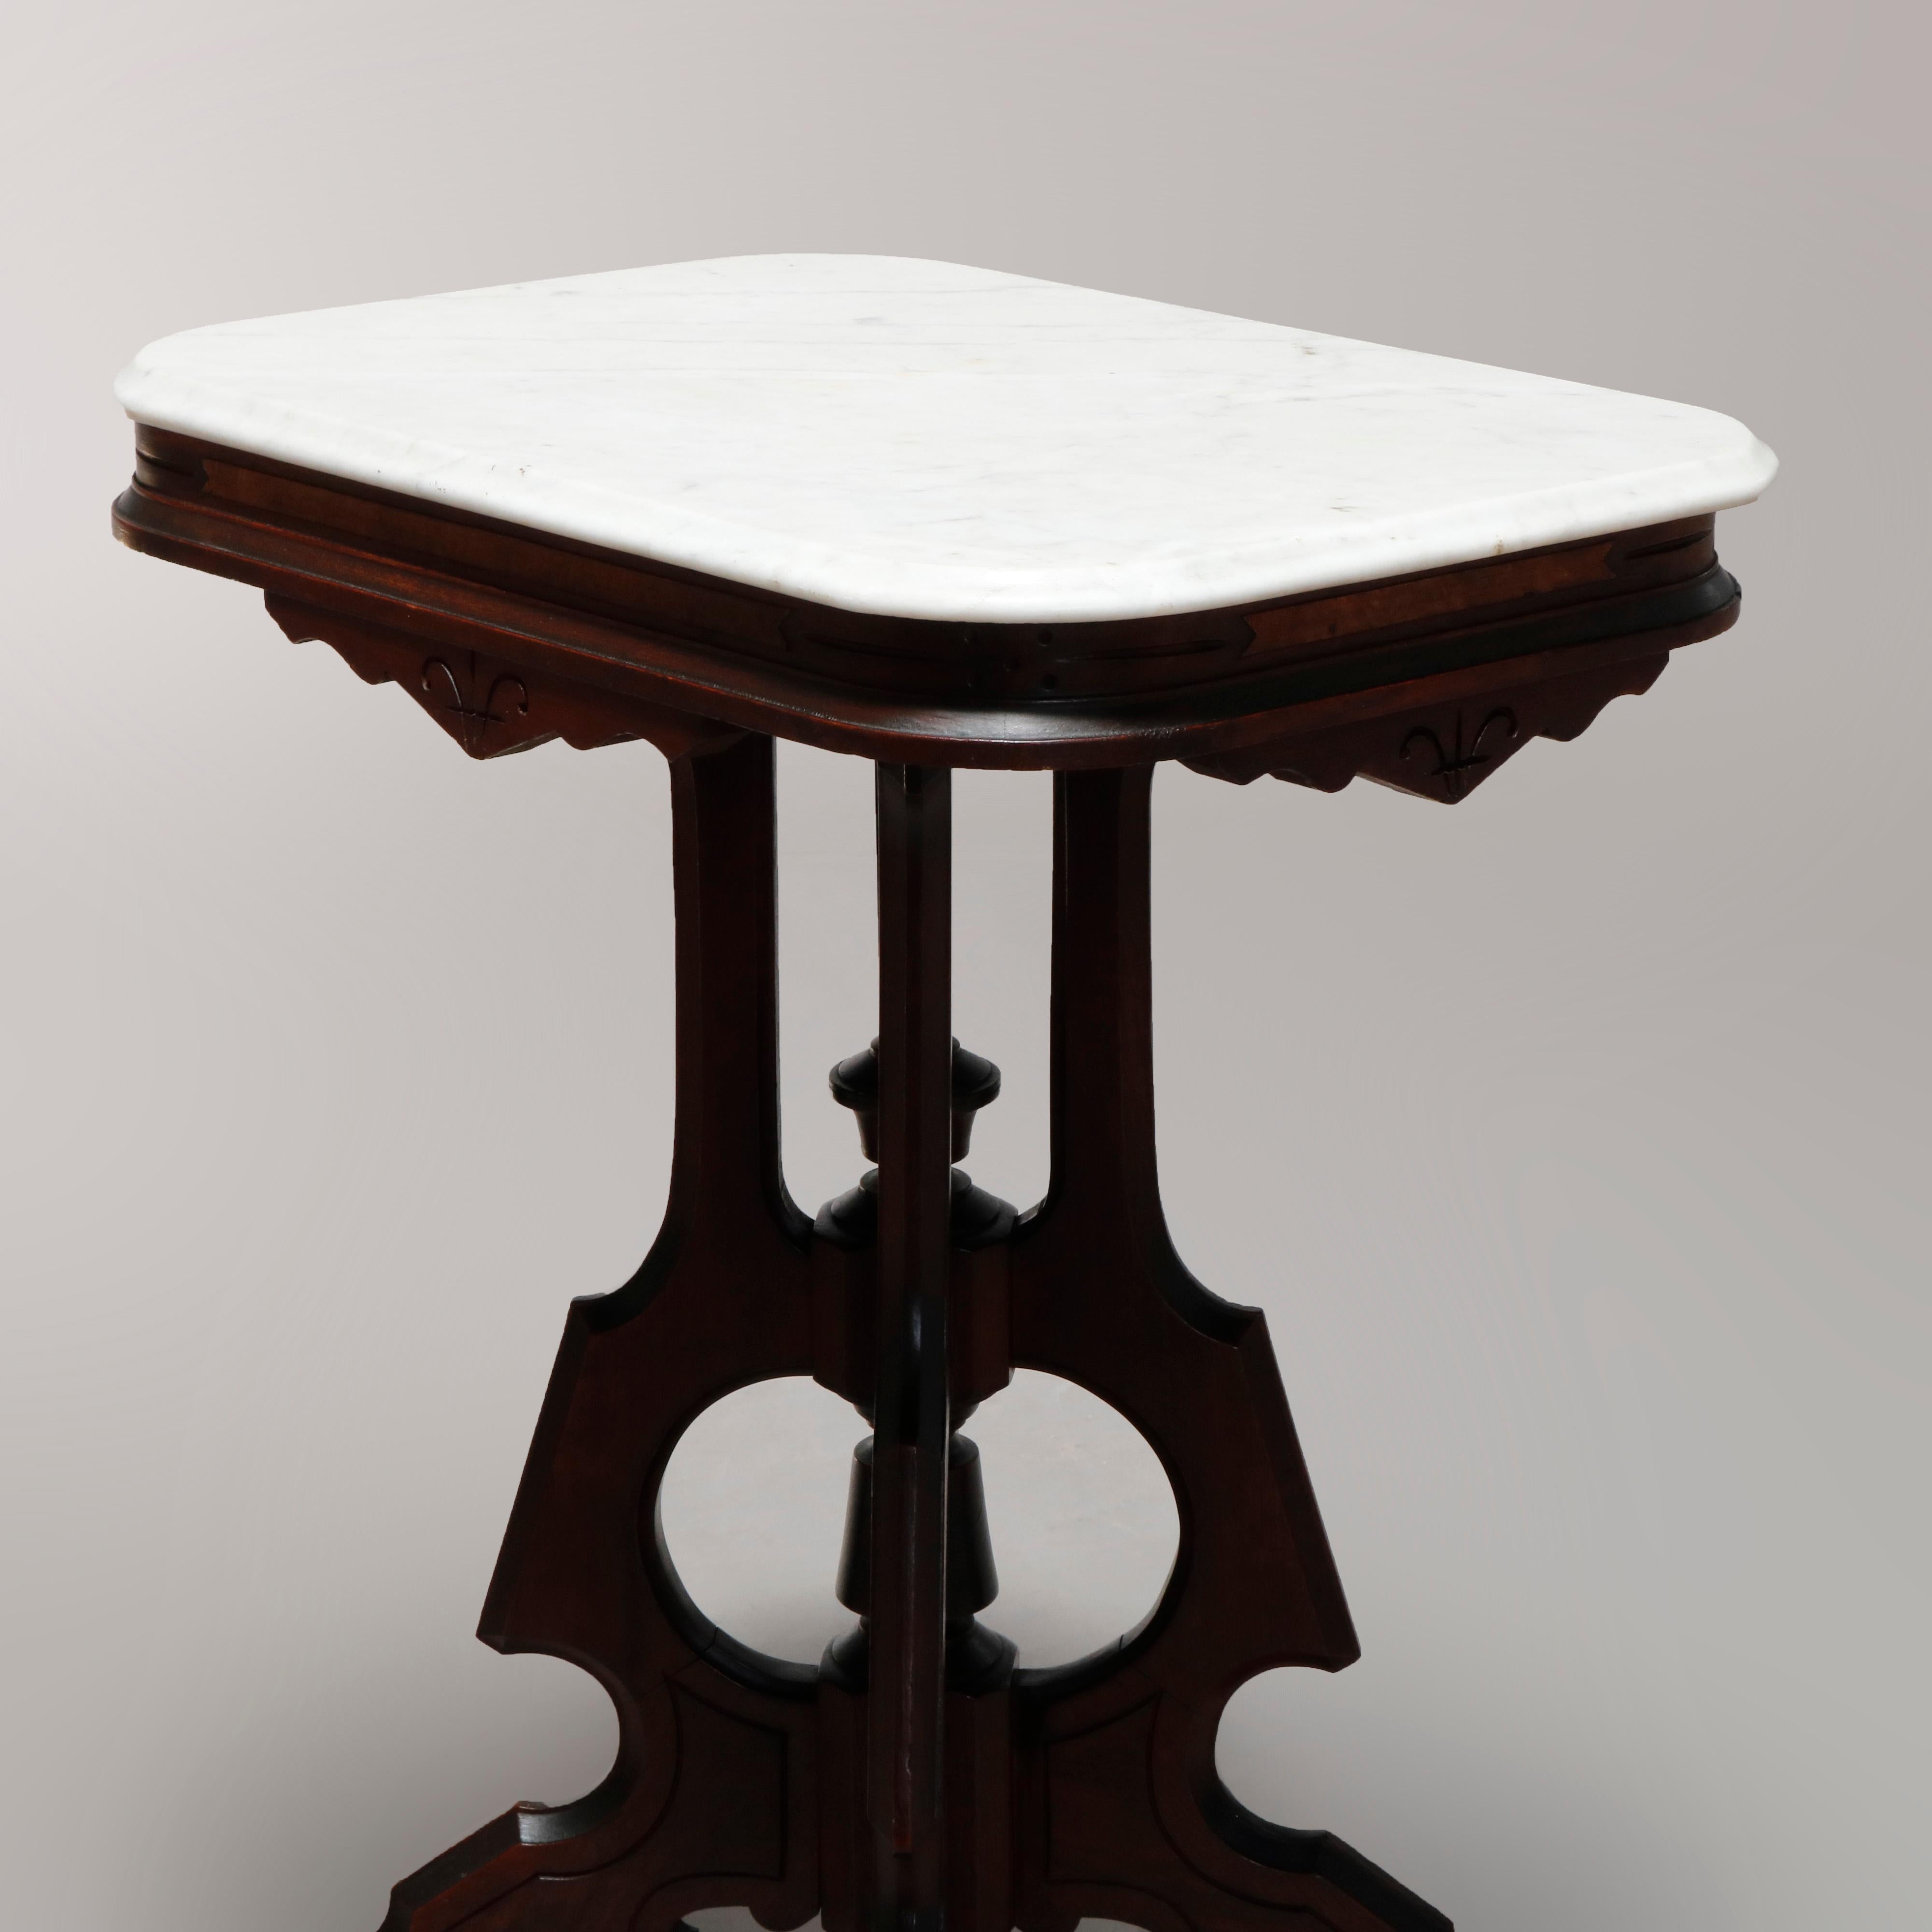 19th Century Antique Eastlake Carved Walnut Marble-Top Side Table, circa 1890